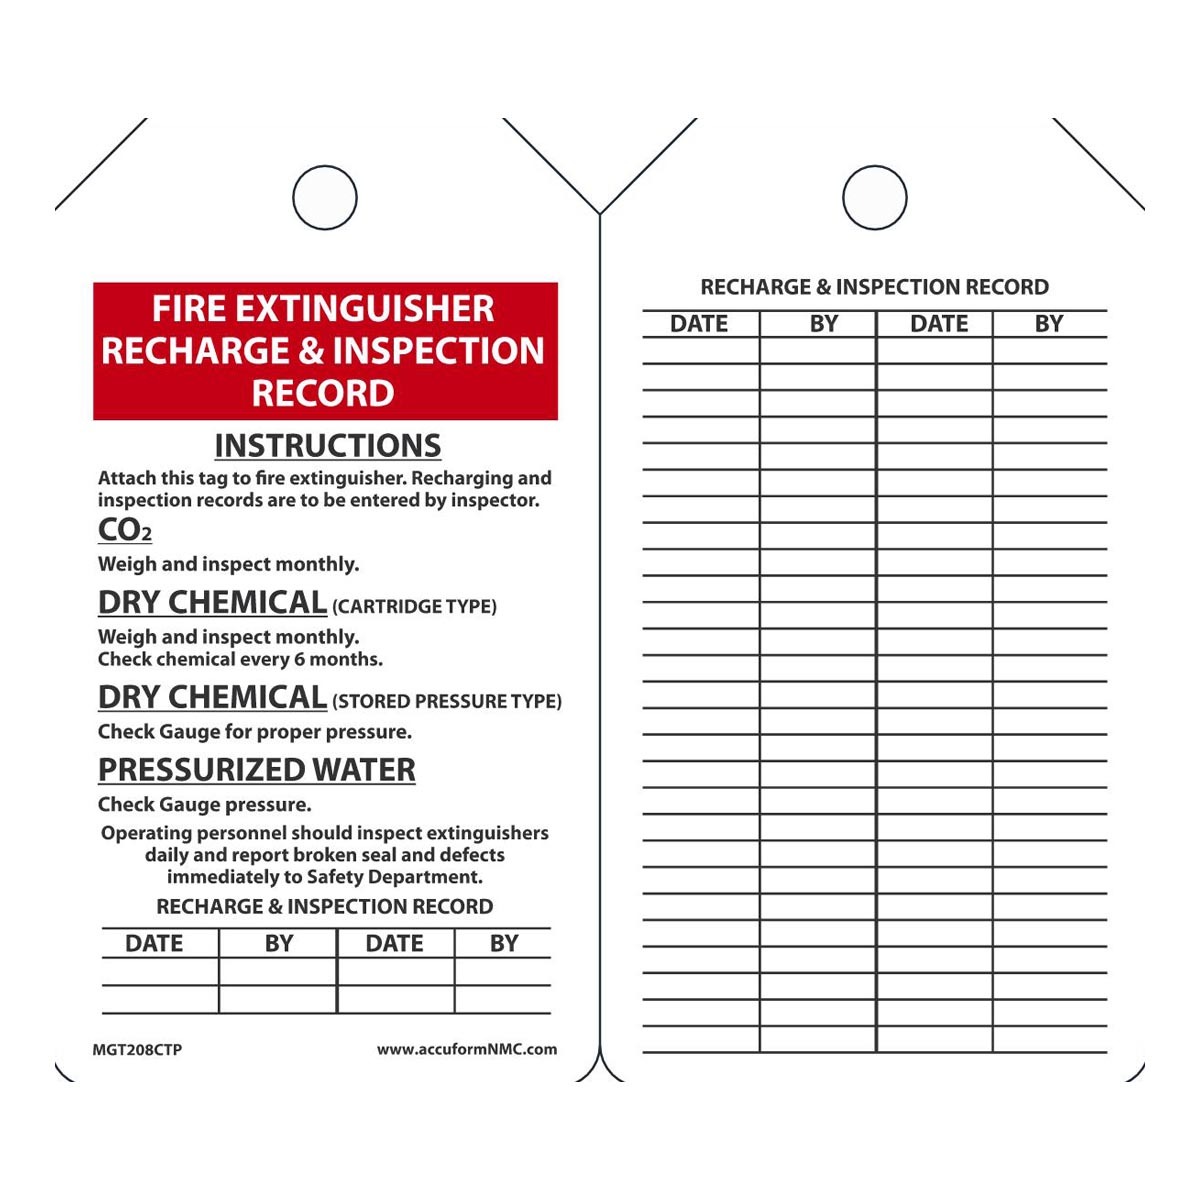 Airgas - A81TBB315RDP - AccuformNMC™ 4 3/4 X 2 3/8 Red Cardstock Blank Tag